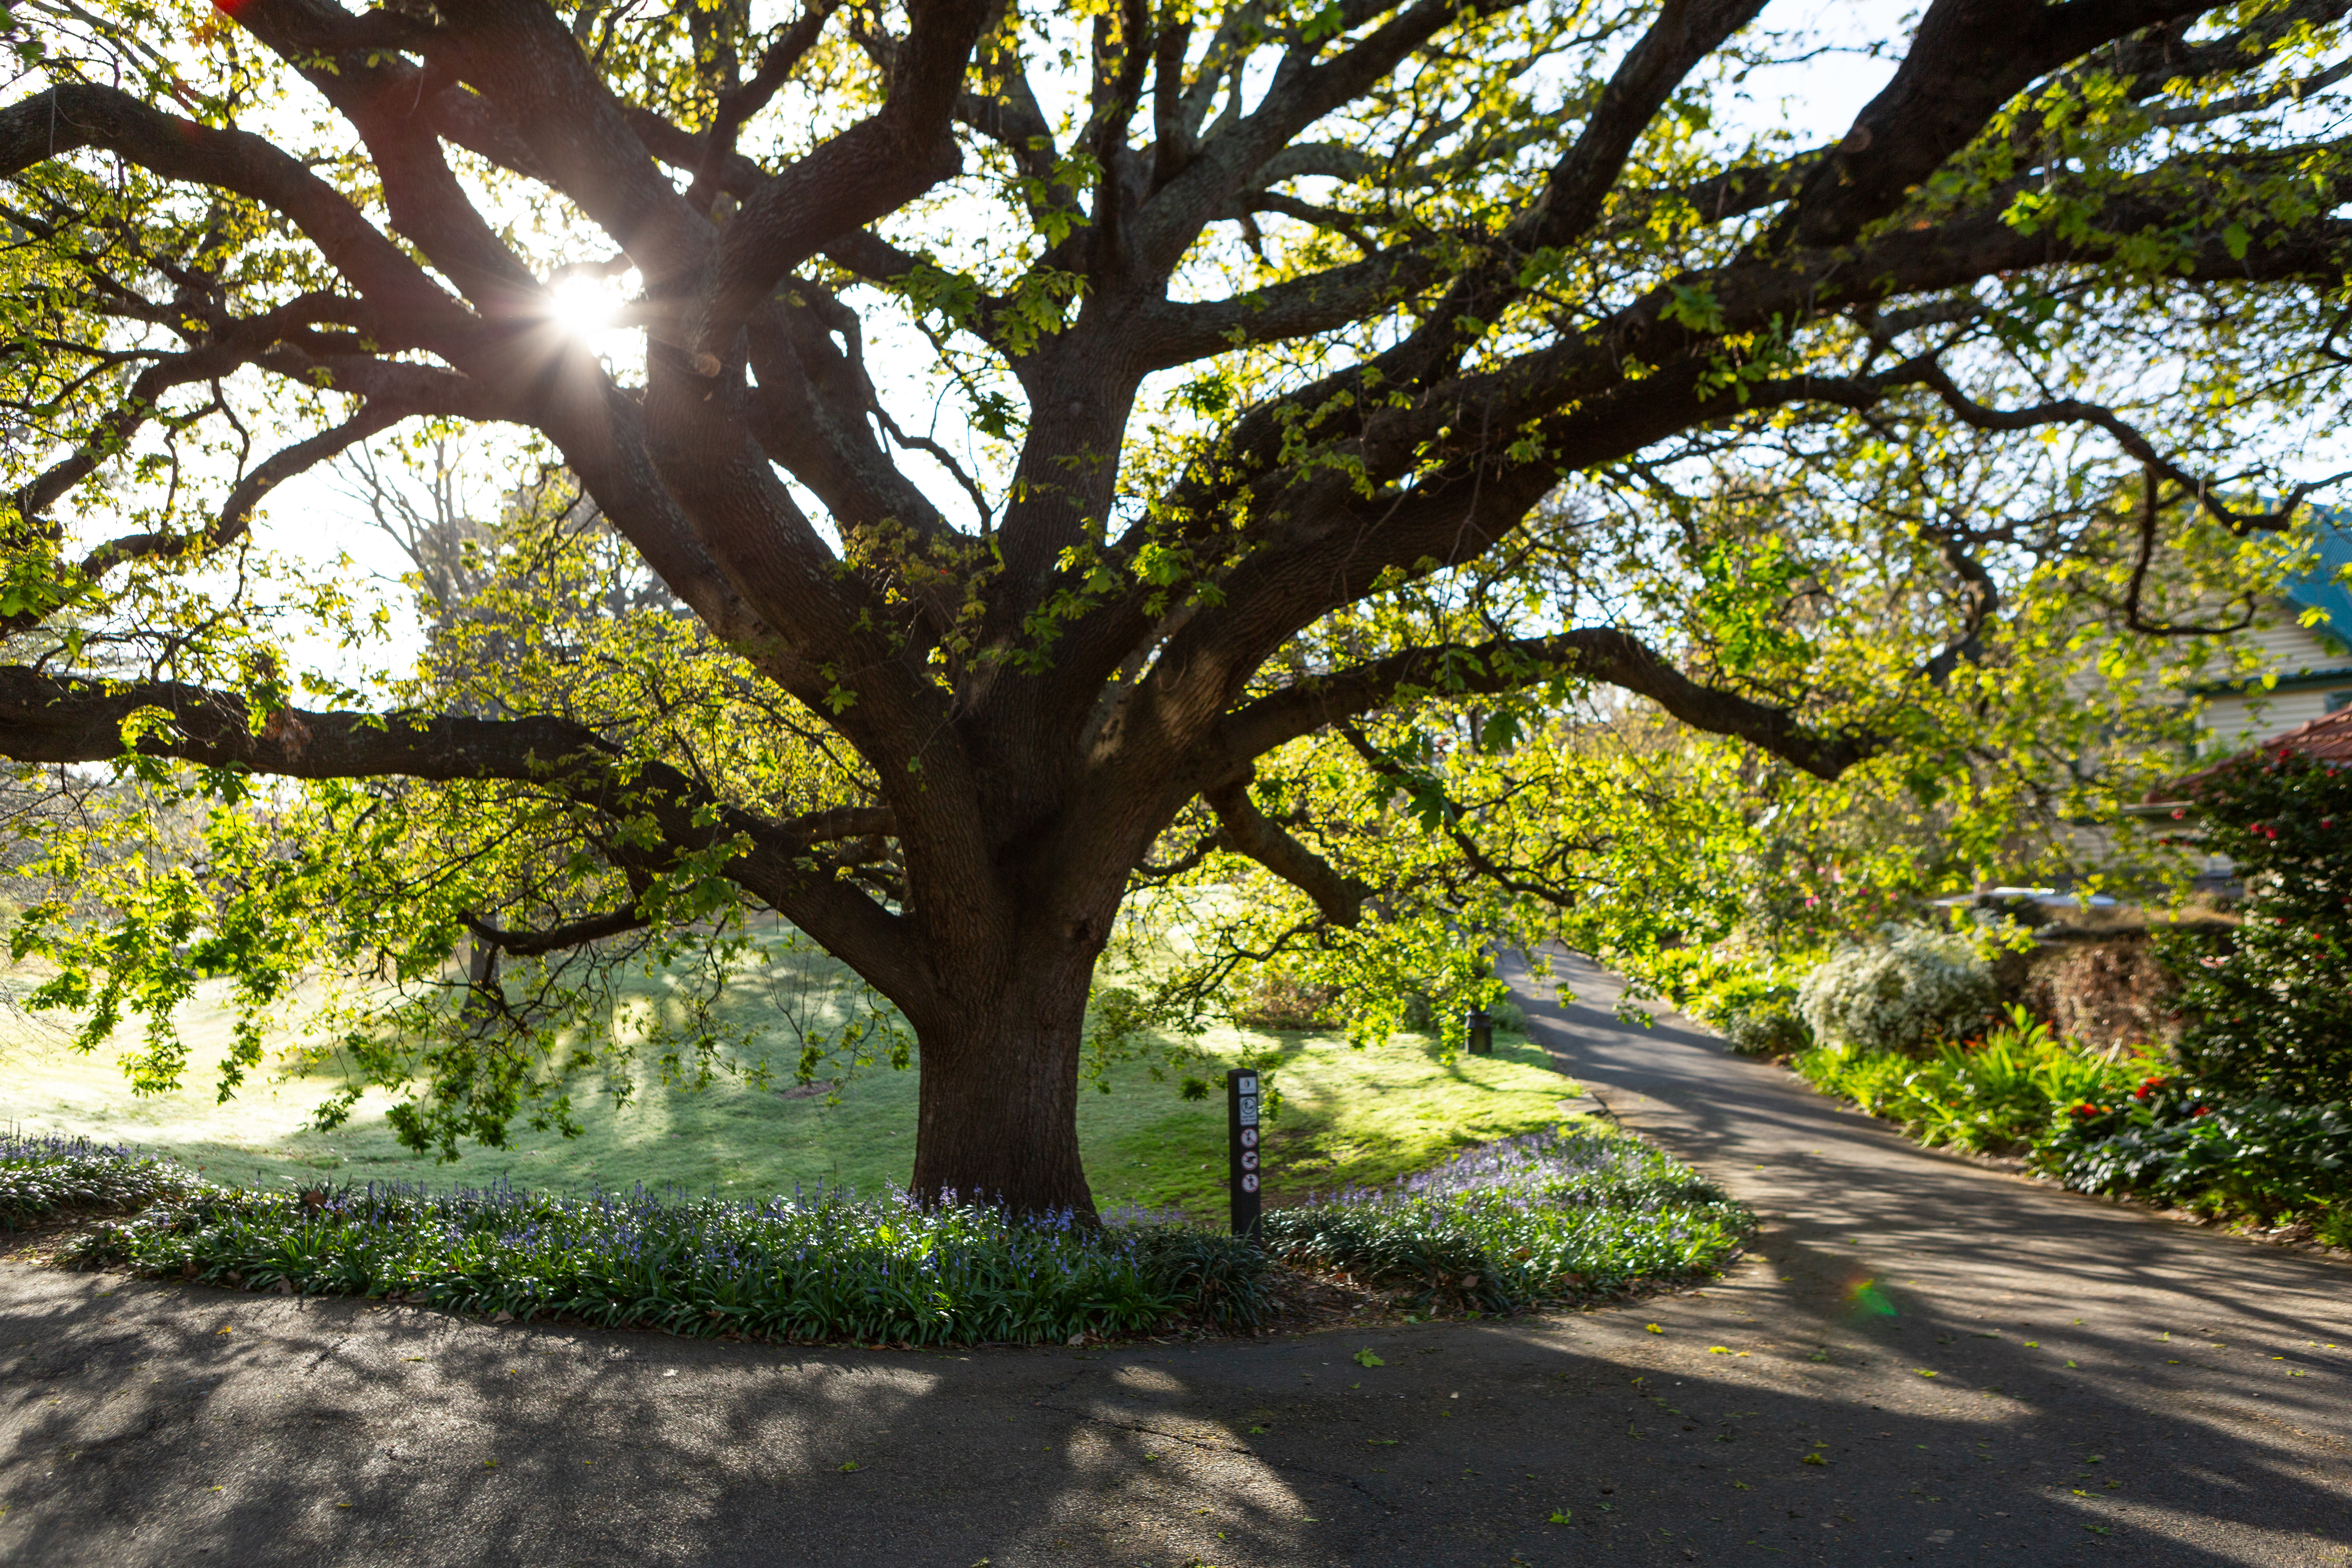 A large tree at a park with green foliage, lit by the sun that is coming through the leaves